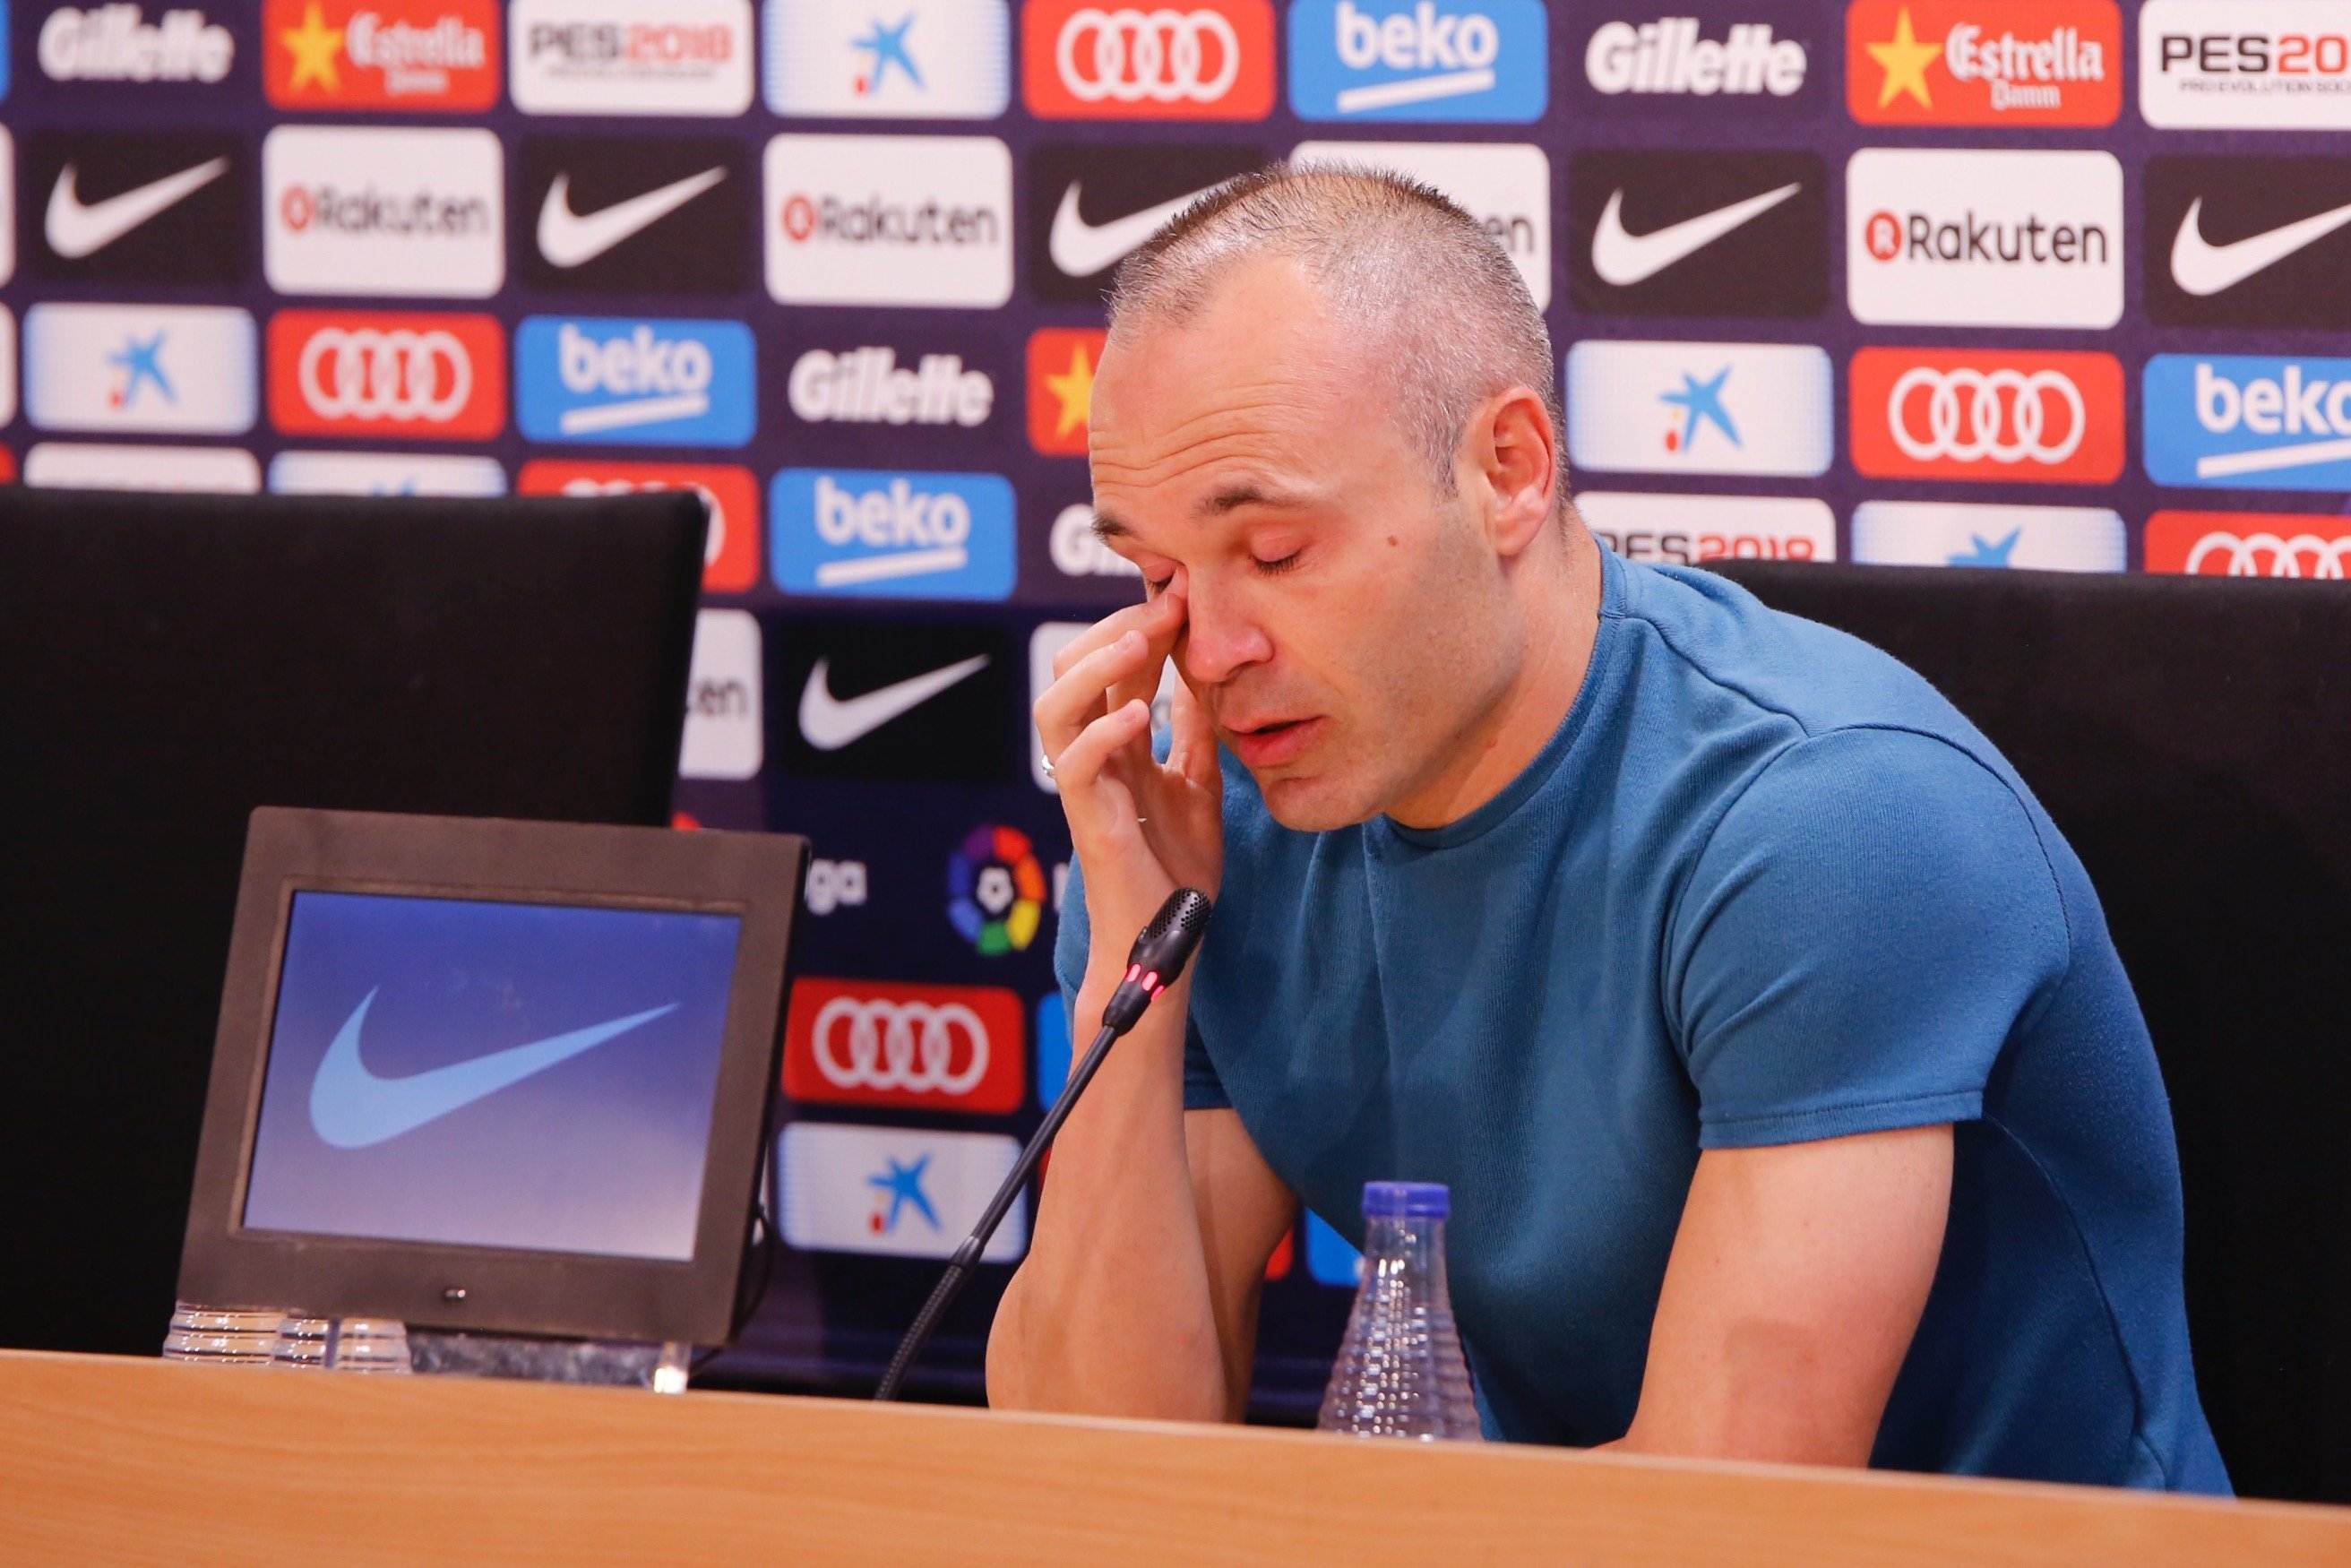 Iniesta's emotional farewell: "Barça and I have given each other everything"